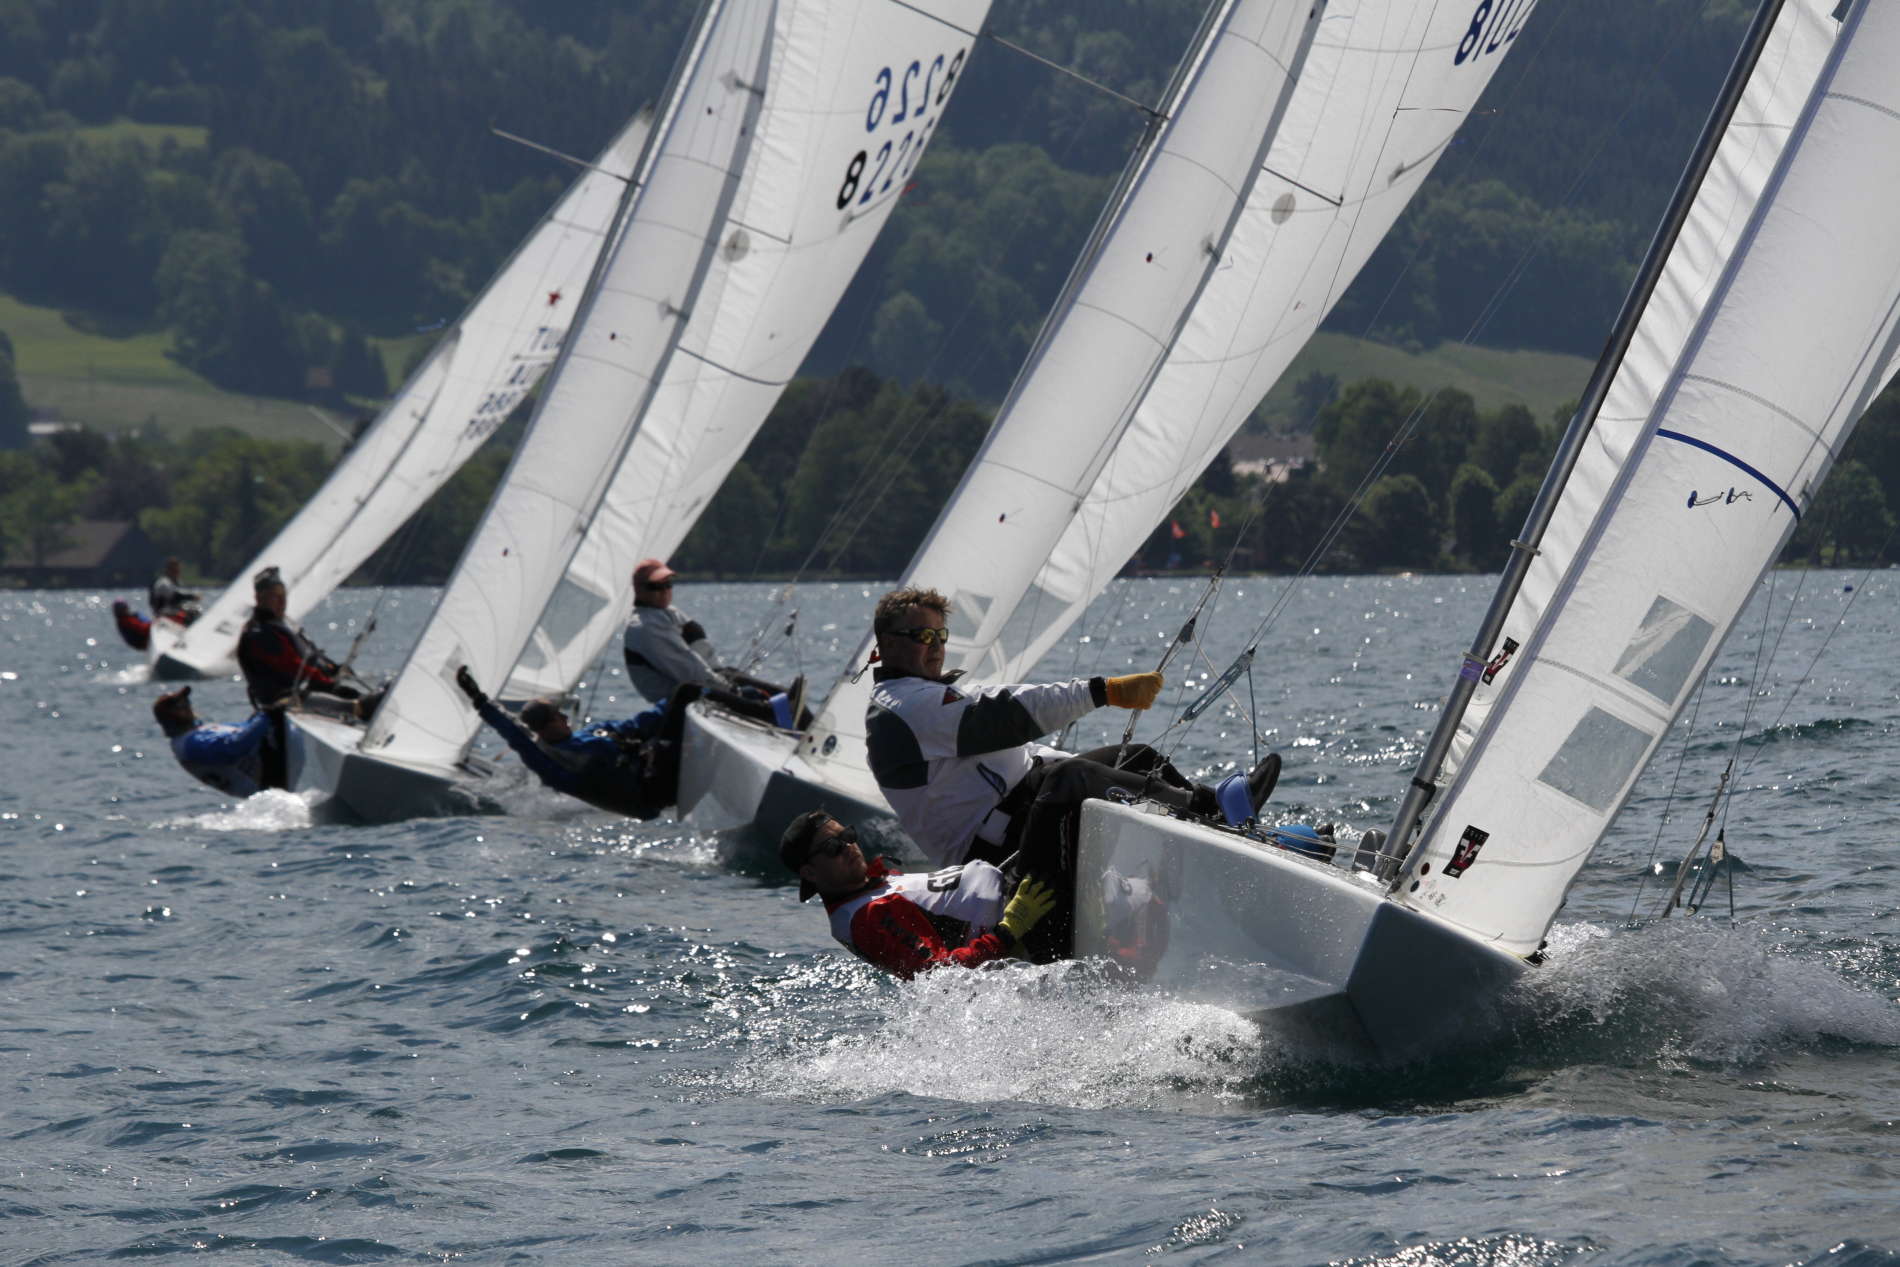  Star  Eastern Hemisphere Championship 2019  Attersee AUT  Final results, the Swiss